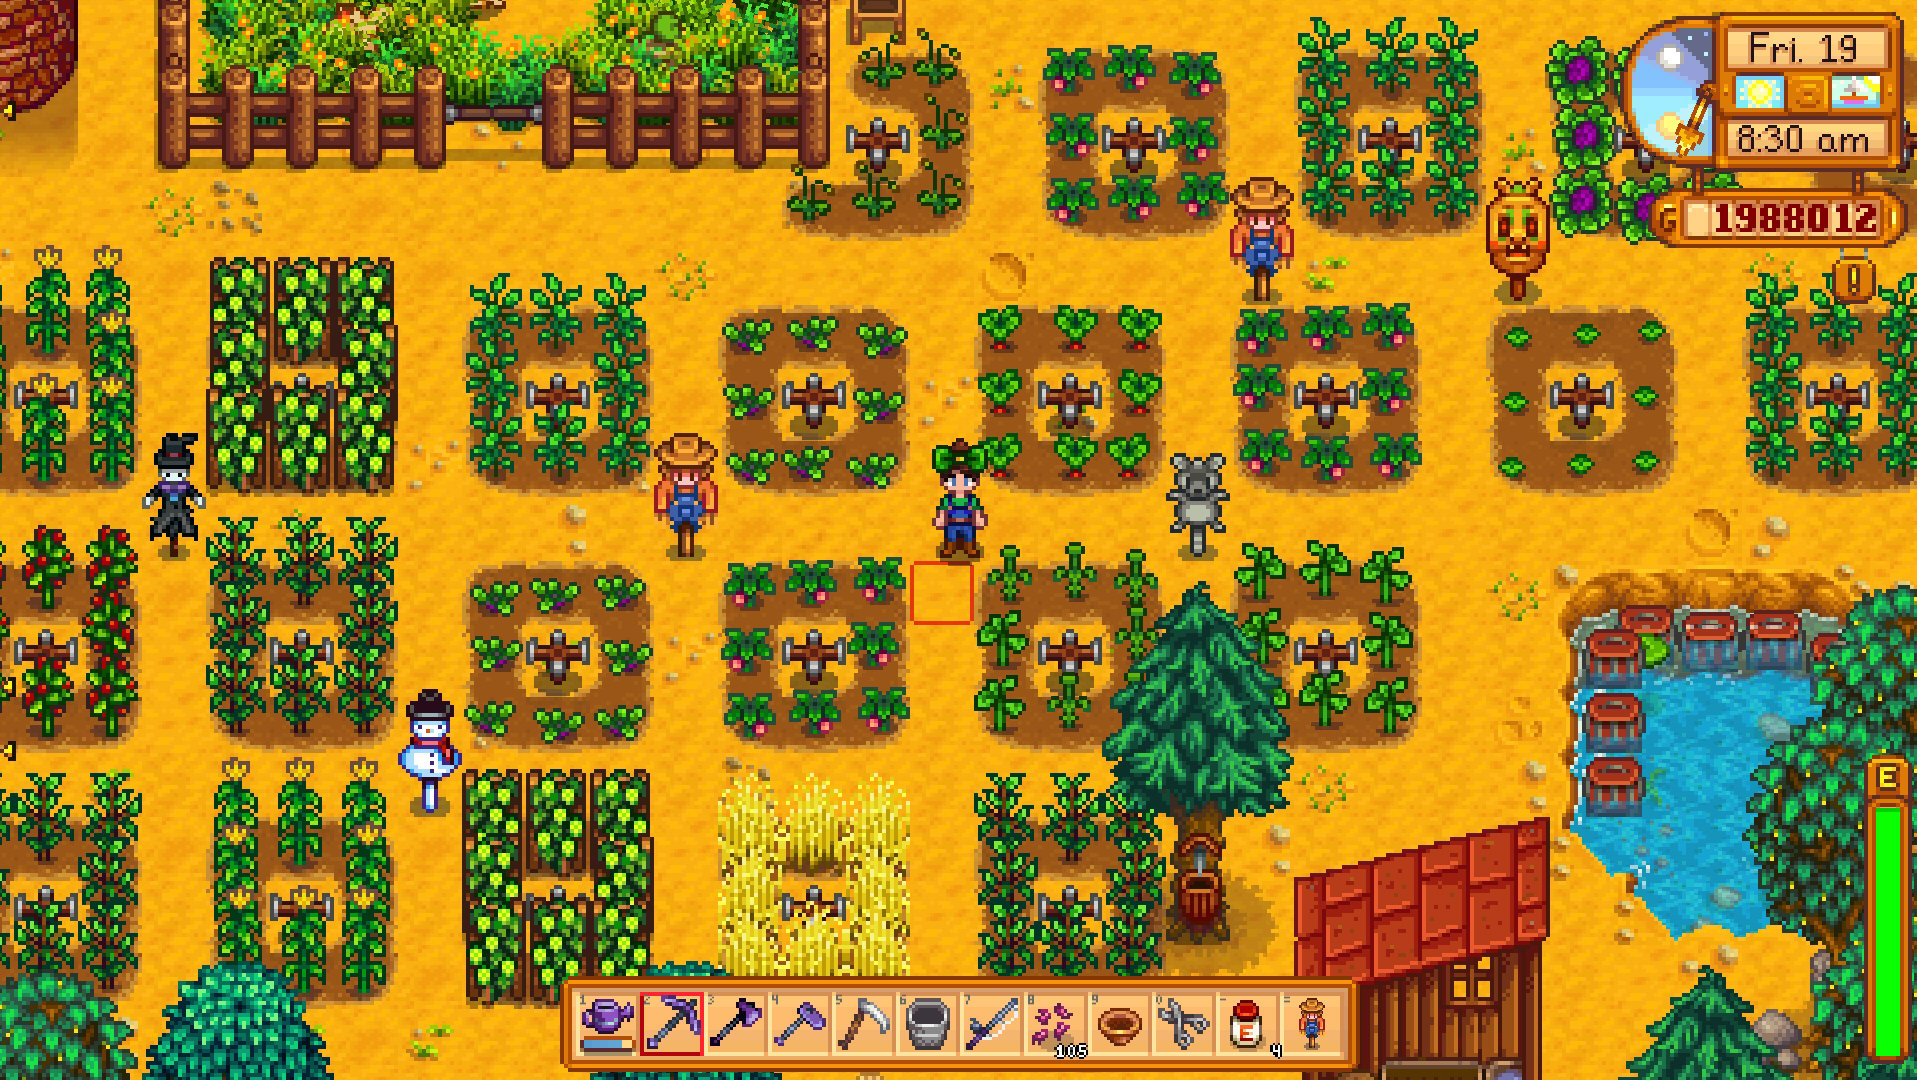 The player stands in a field full of crops and scarecrows.